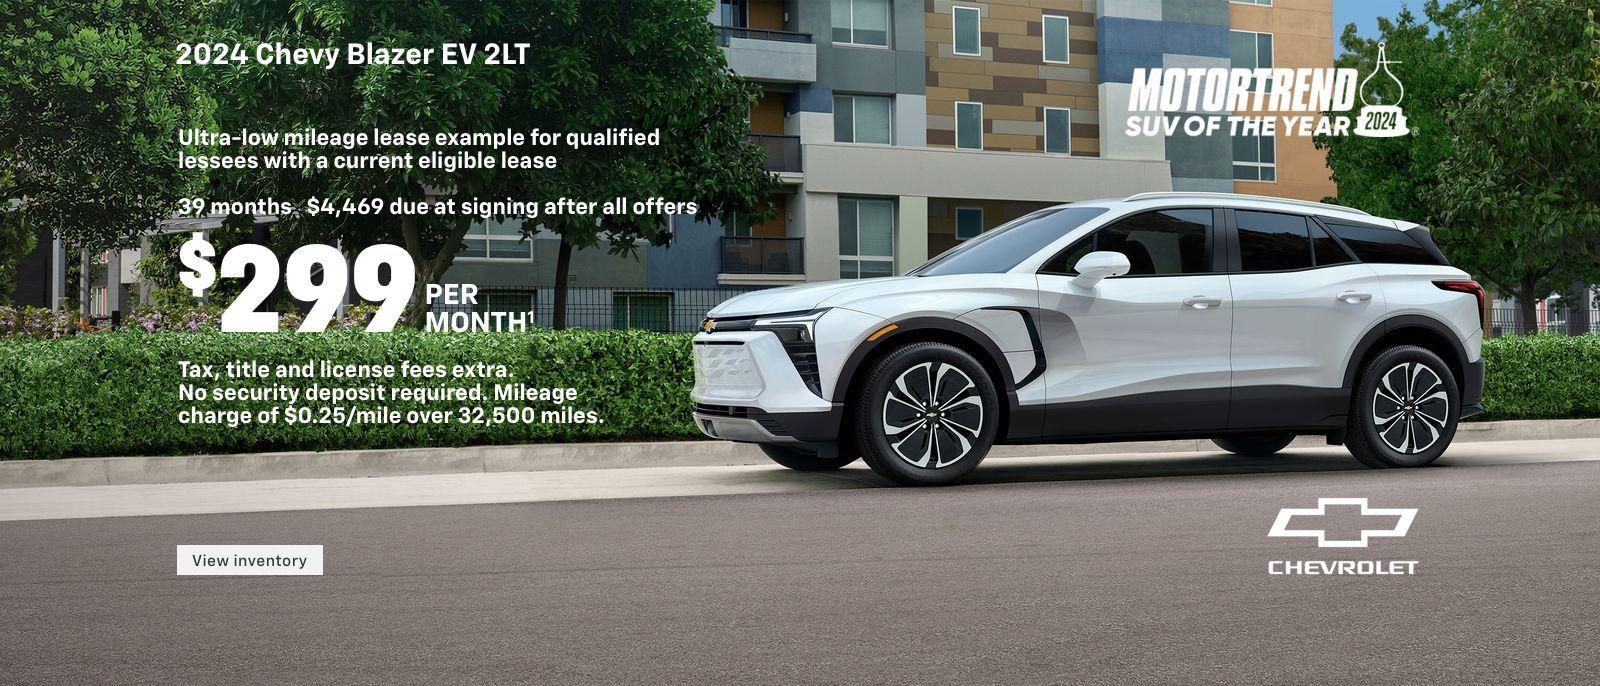 2024 Chevy Blazer EV 2LT. Ultra-low mileage lease example for qualified lessees with a current eligible lease. $299 per month. 39 months. $4,469 due at signing after all offers. Tax, title and license fees extra. No security deposit required. Mileage charge of $0.25/mile over 32,500 miles.